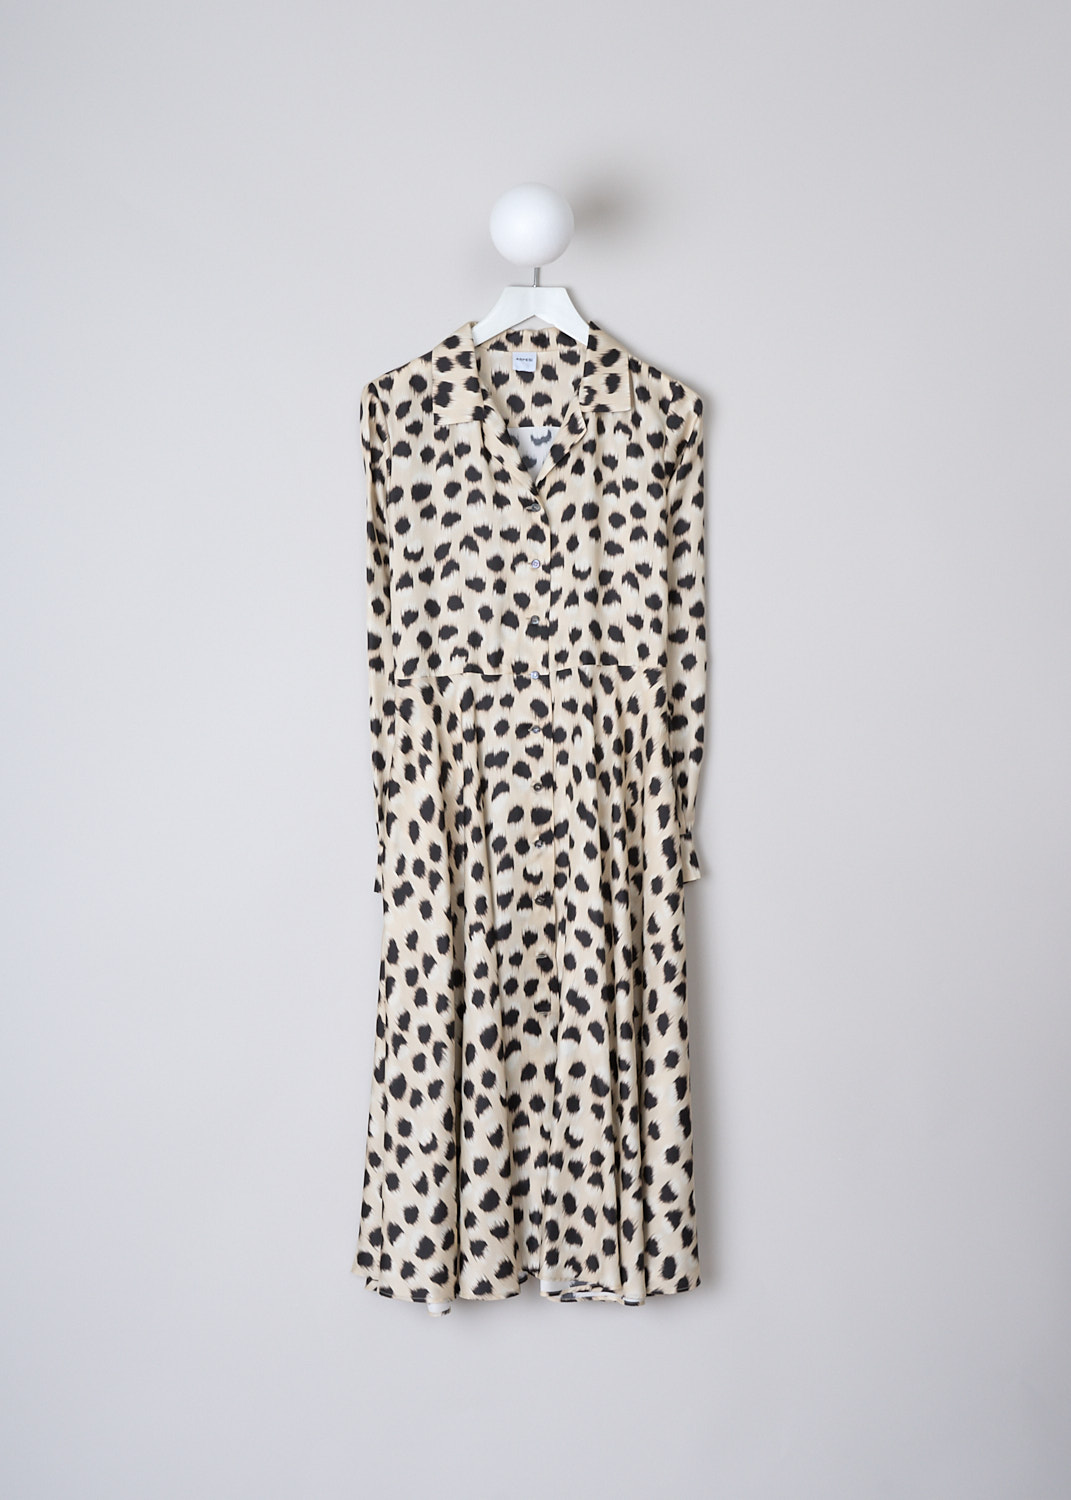 ASPESI, LONG SLEEVE MIDI DRESS WITH FADED ANIMAL PRINT, 2990_V592_60113, Beige, Print, Black, Front, This beige midi shirt dress with faded animal print has a cutaway-collar with a V-neckline and a front button closure. The long sleeves have buttoned cuffs. Slanted pockets are concealed in the side seams. The dress has a more fitted bodice with a flared skirt.
